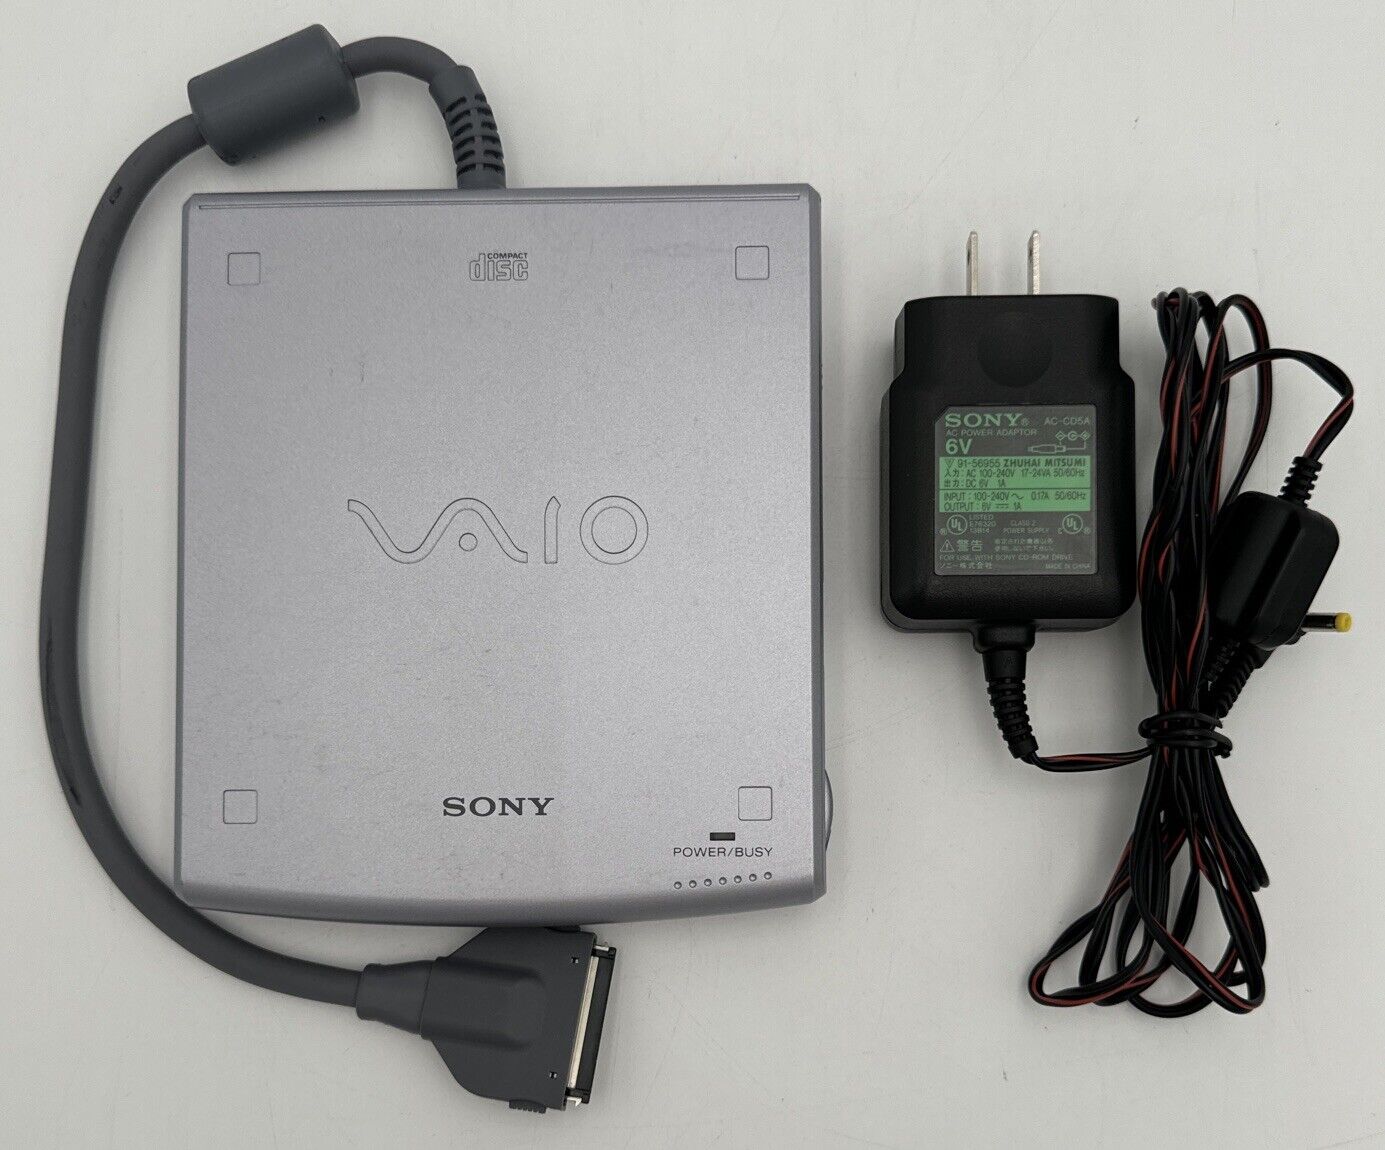 SONY VAIO PCGA-CD5 External CD-ROM Drive Player - Used, Great Condition - TESTED